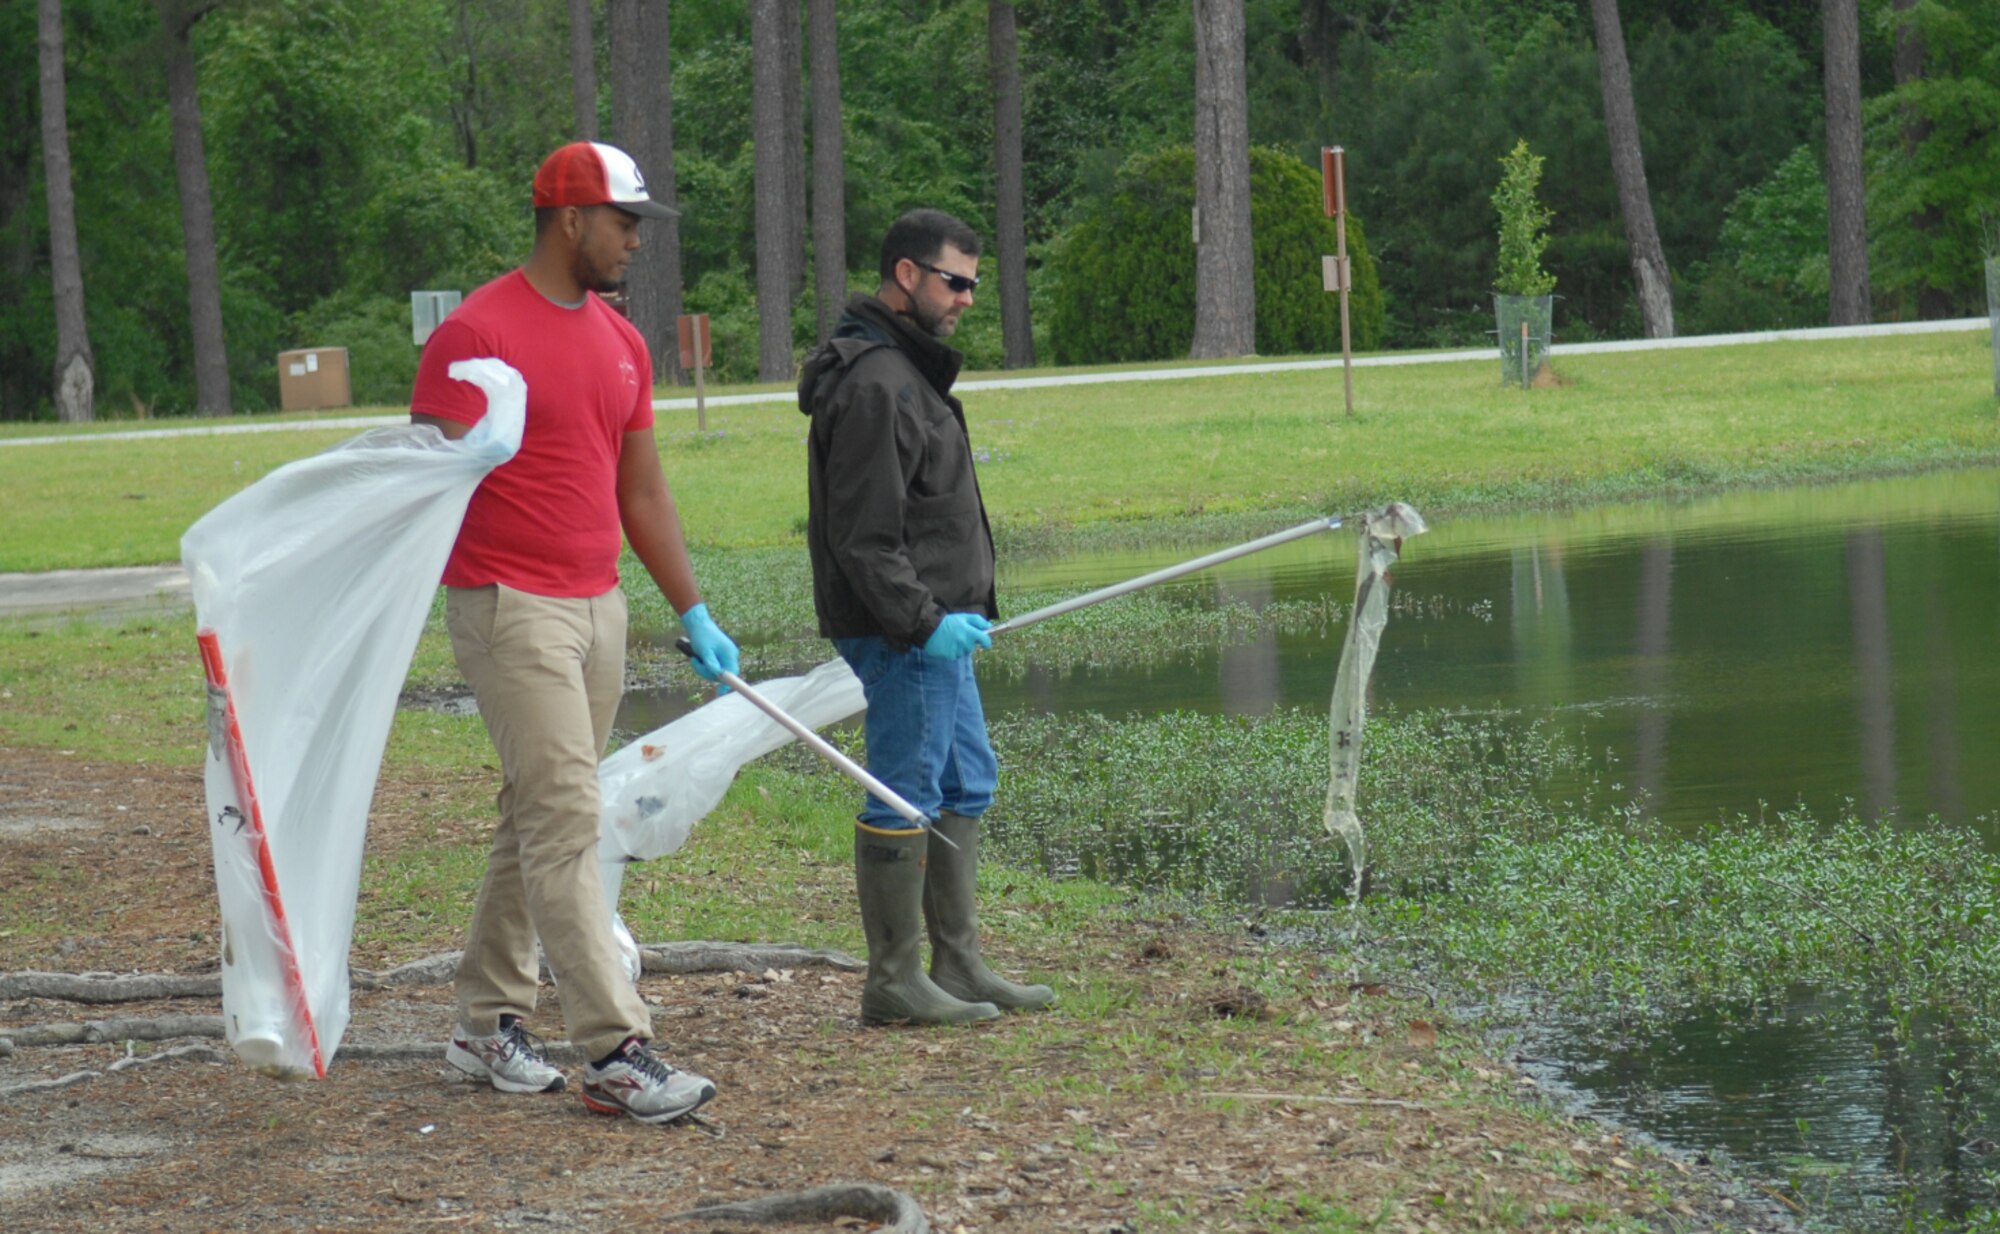 Jacob Tuttle, Natural Cultural Resource manager right) and Darquelle Gooch, Georgia Southern University Biology pre-medical student, clean-up the bank of Scout Lake, April 15, 2016. (U.S. Air Force photo by Misuzu Allen)
